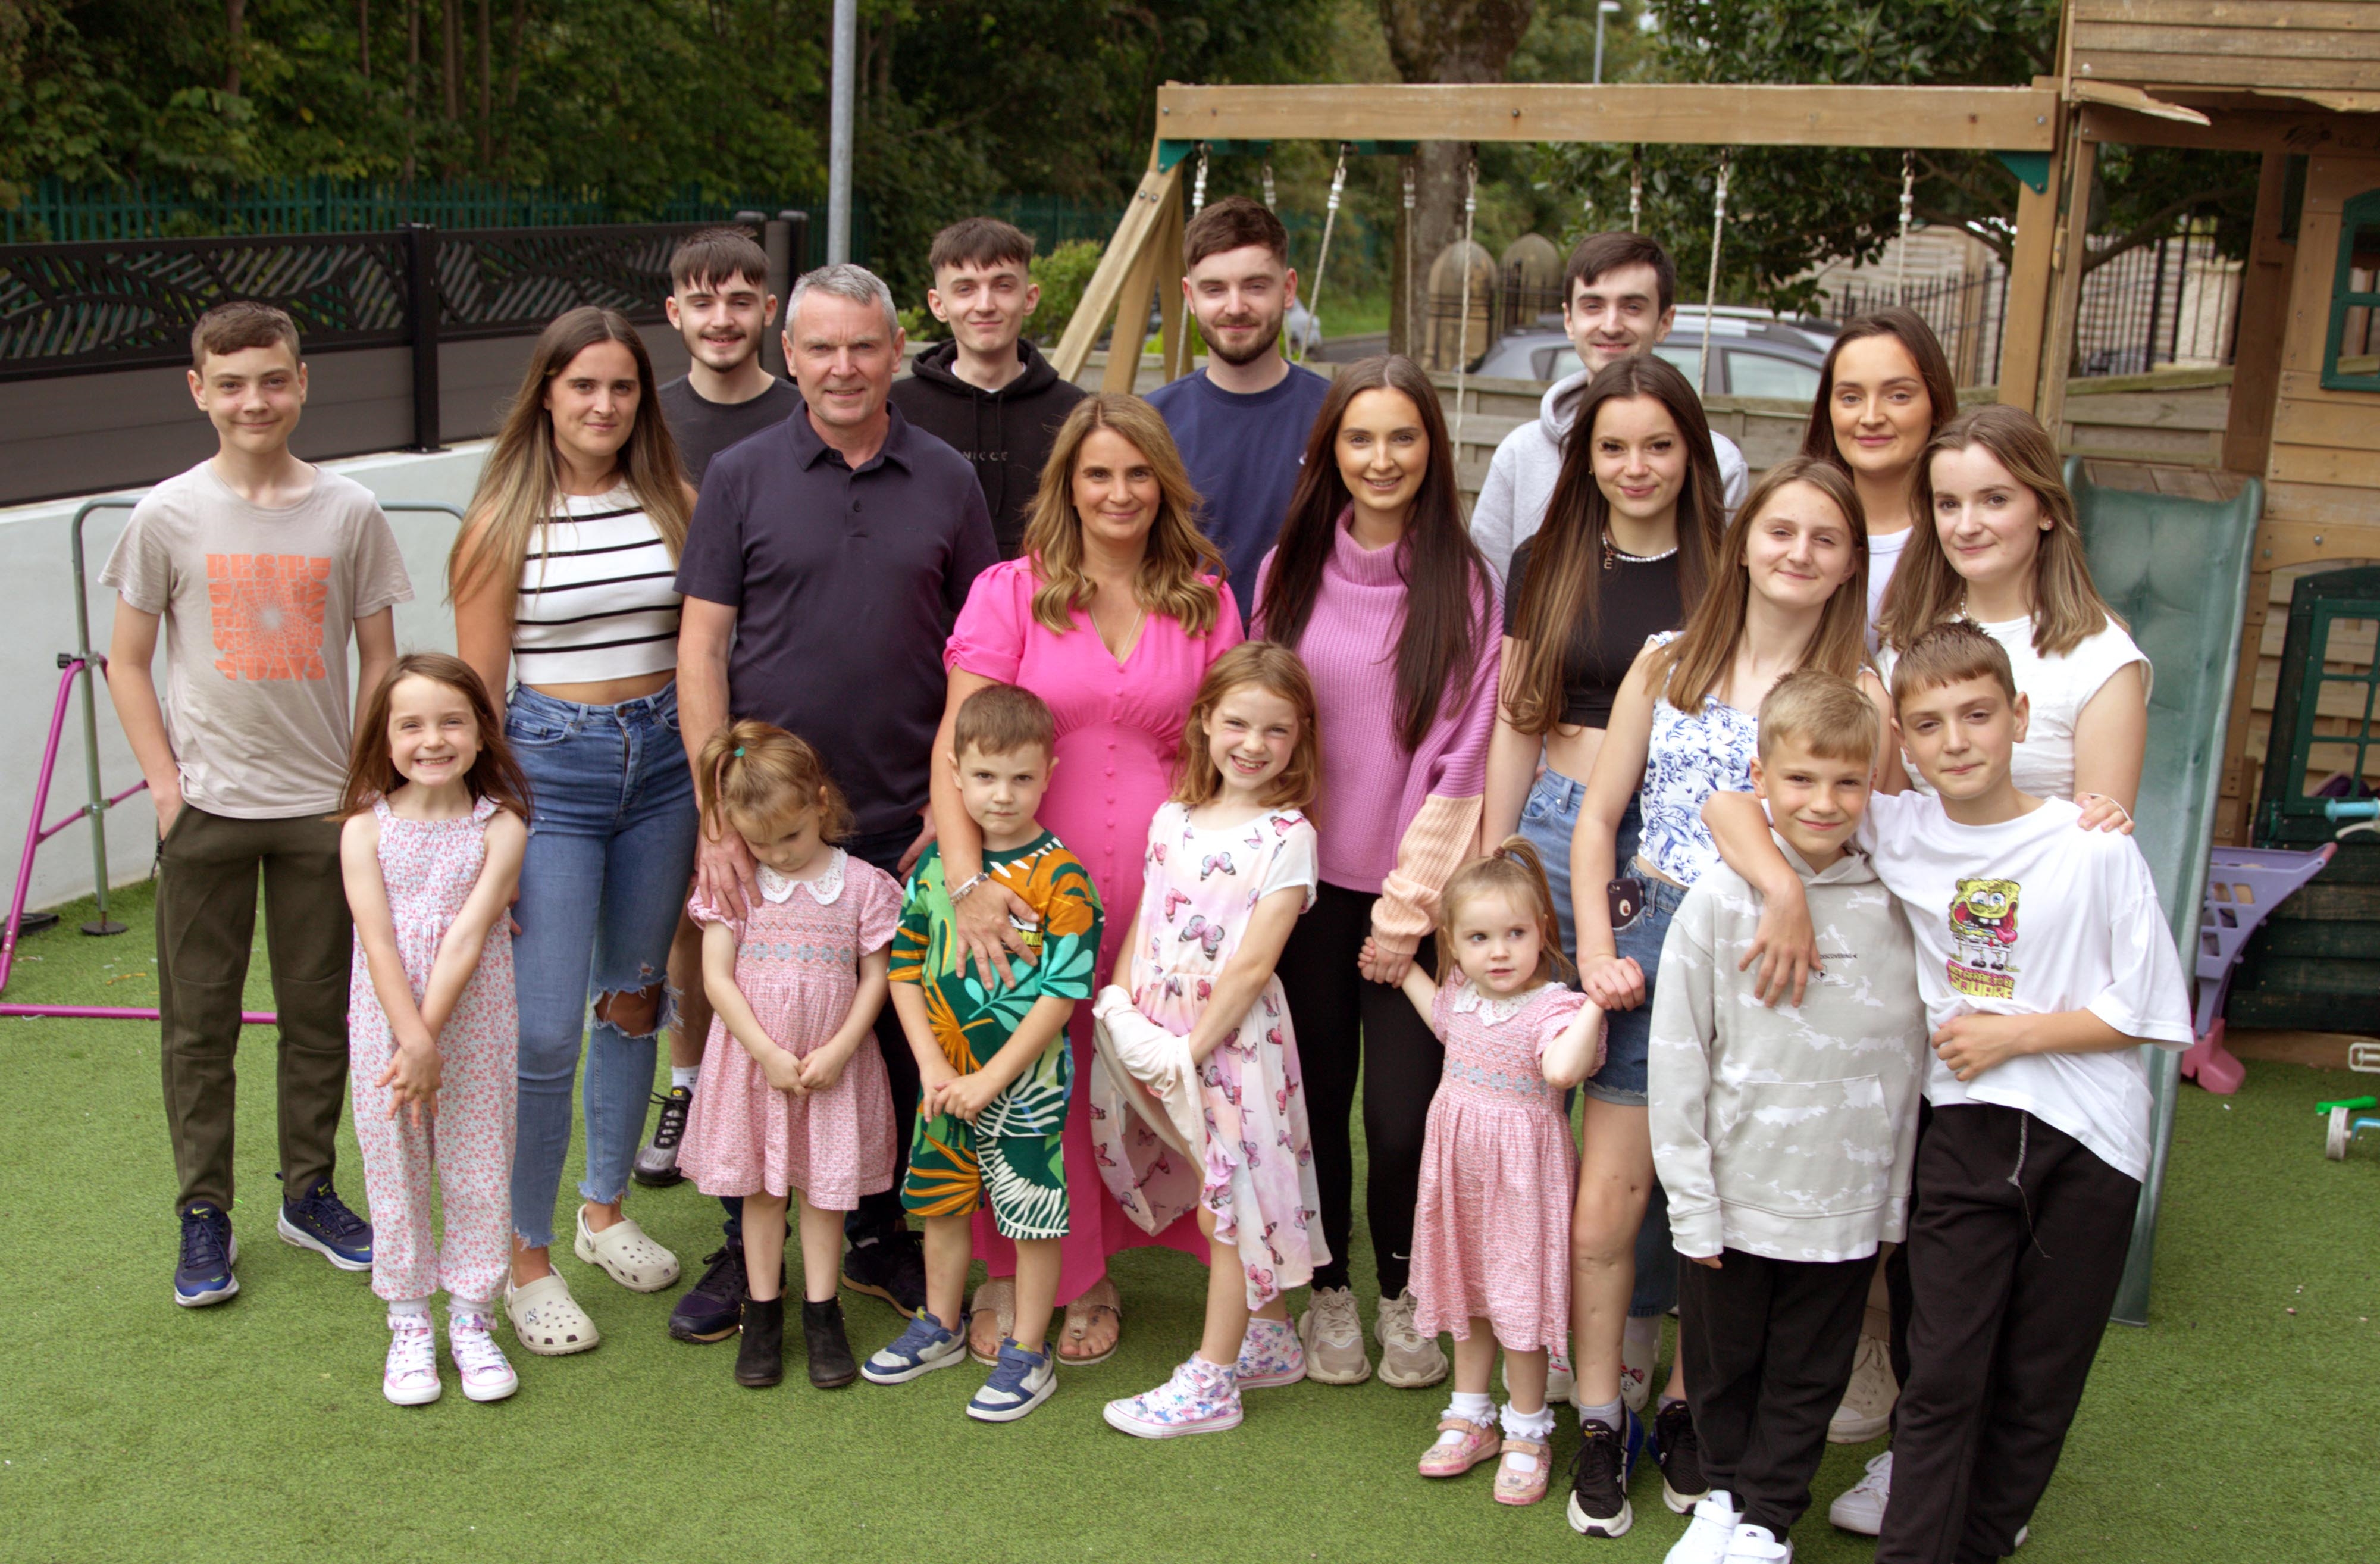 The Radfords are Britain's biggest family with 22 kids